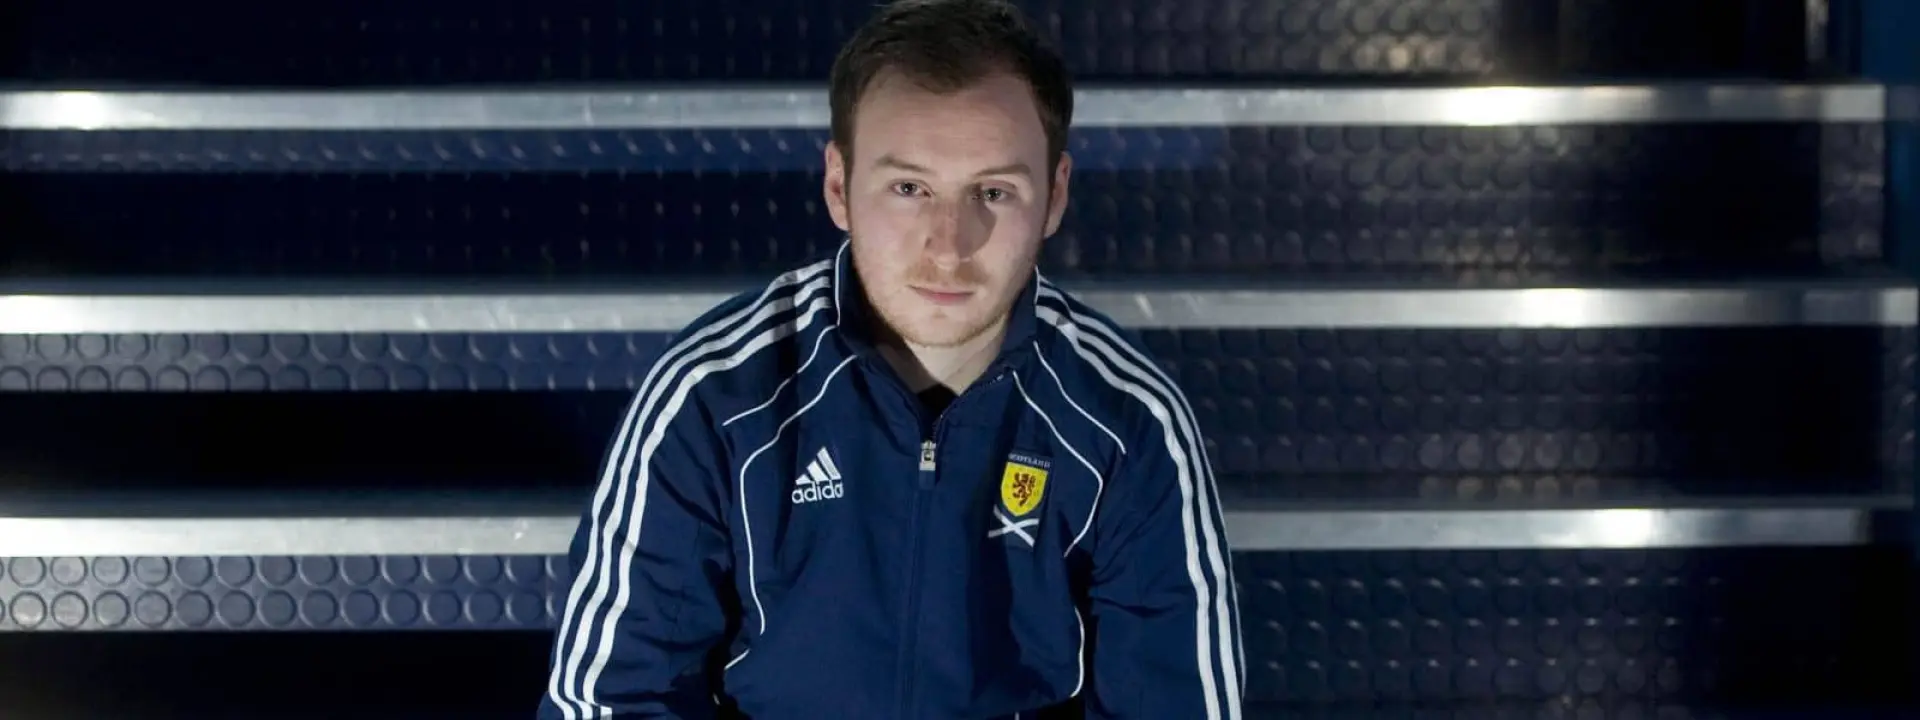 Ian Cathro - odds-on favourite for Hearts job with Ladbrokes